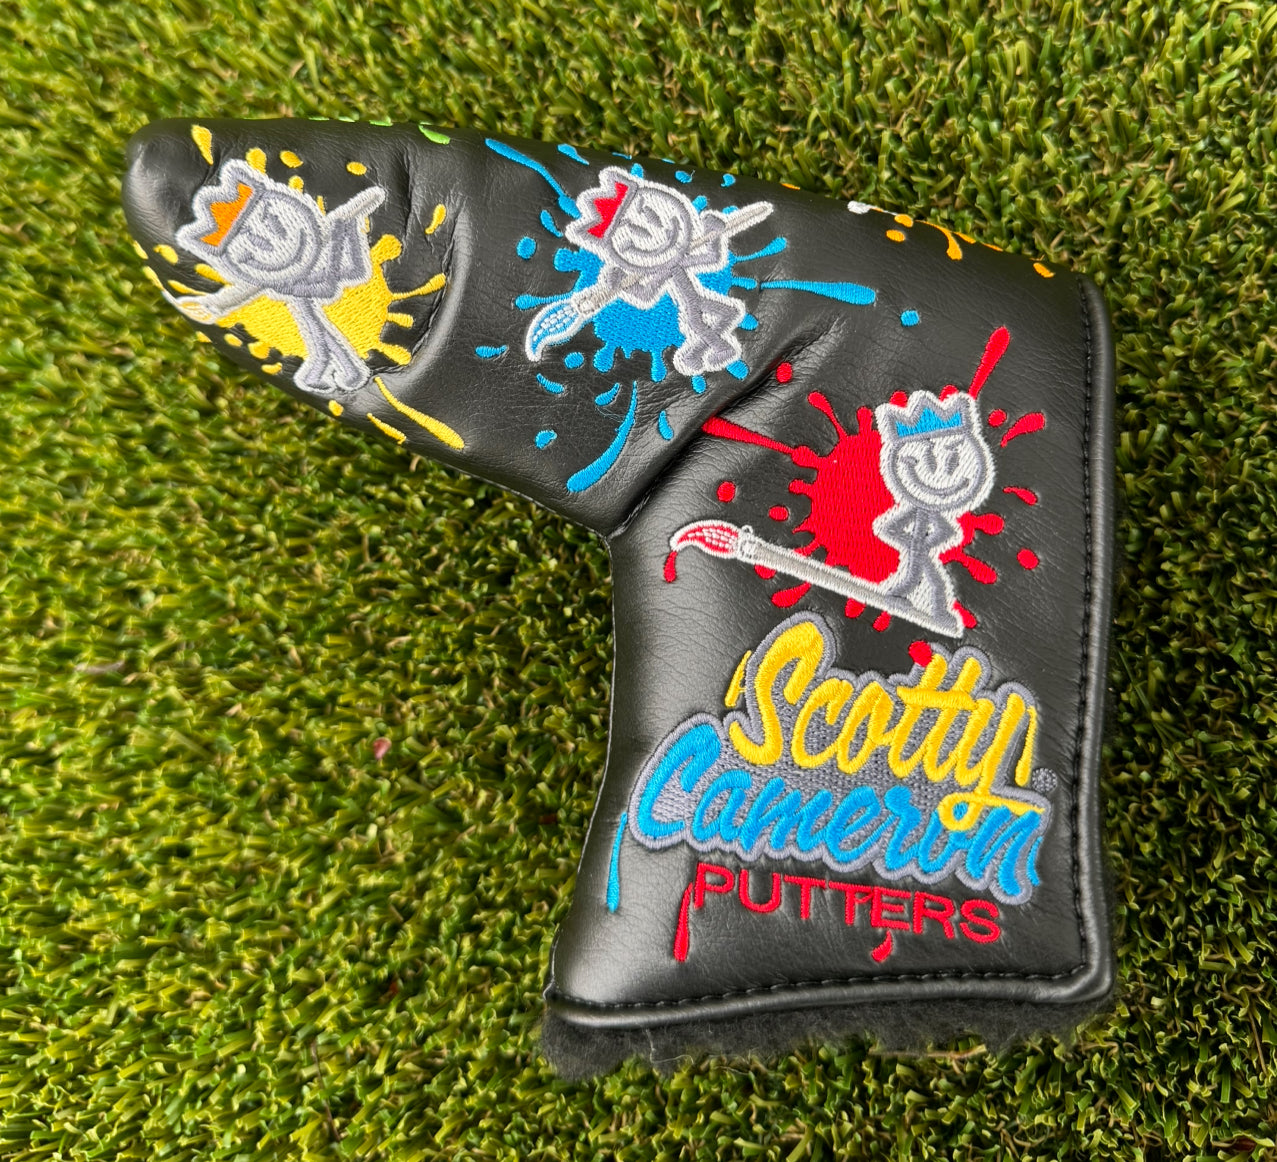 Scotty Cameron Limited Release Custom Shop Blade Headcover